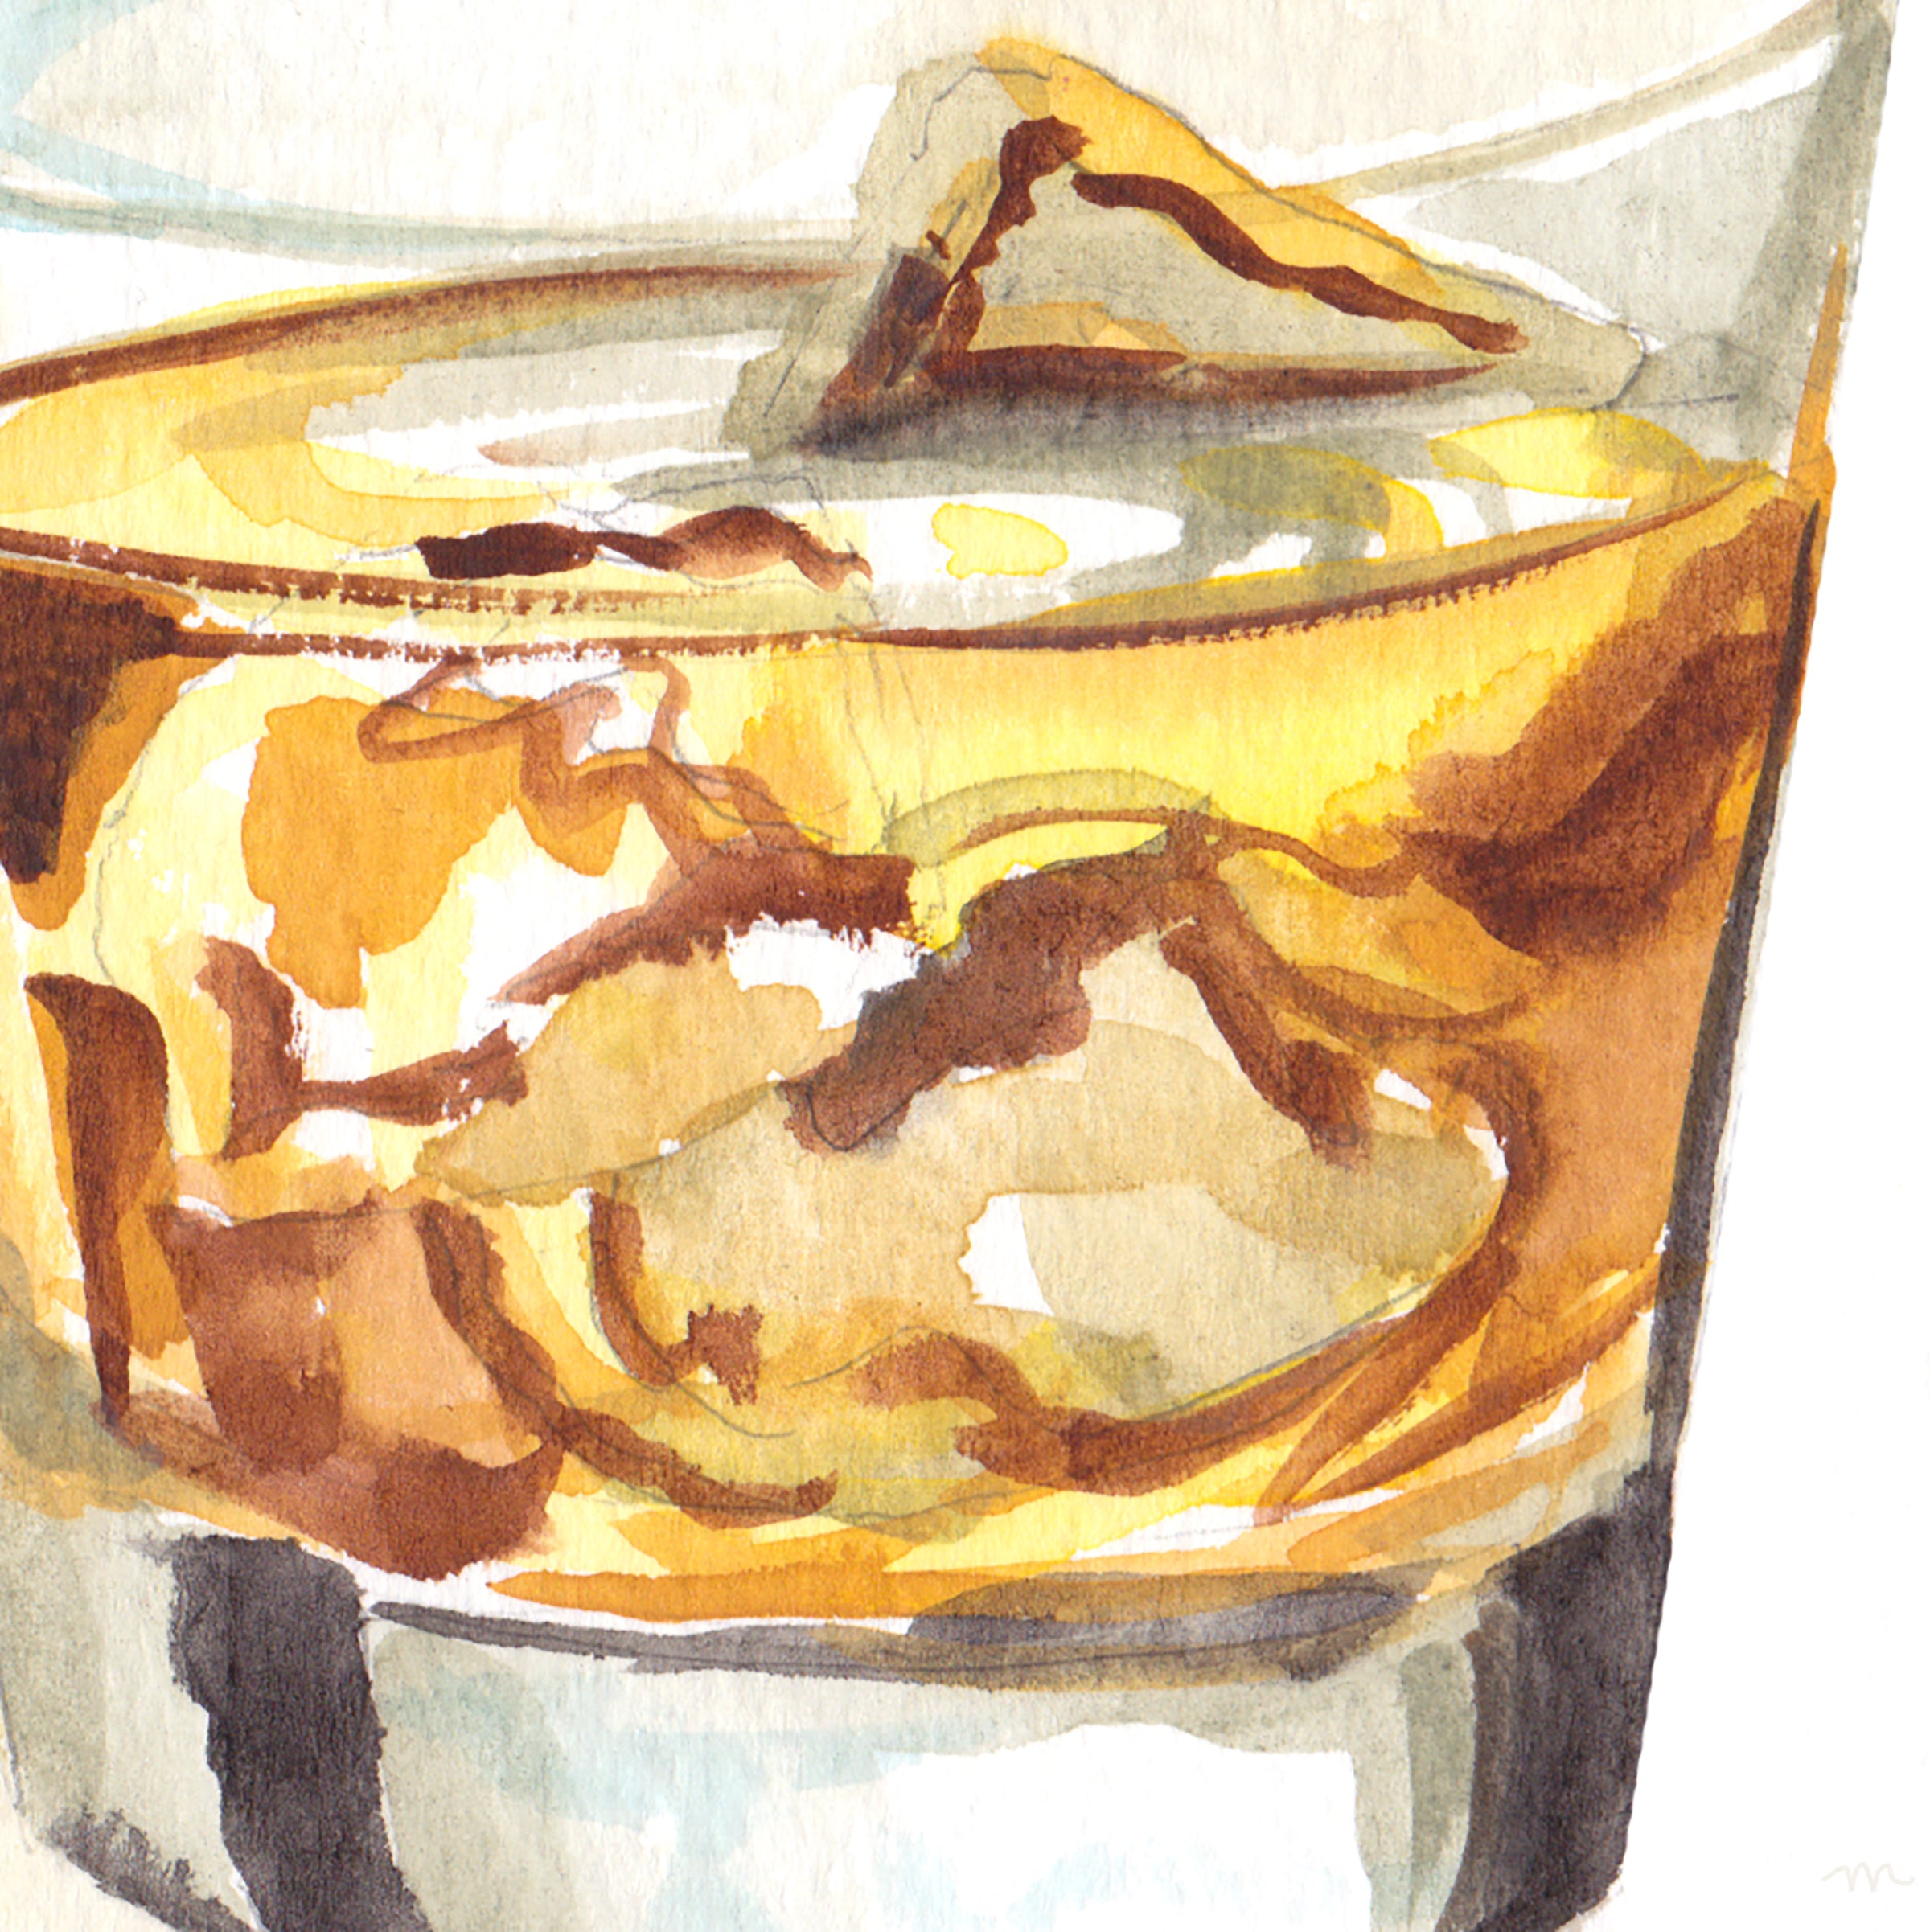 Whiskey On The Rocks Watercolor Bar Cart Decor Unframed Cocktail Wall Art Print - Michelle Mospens